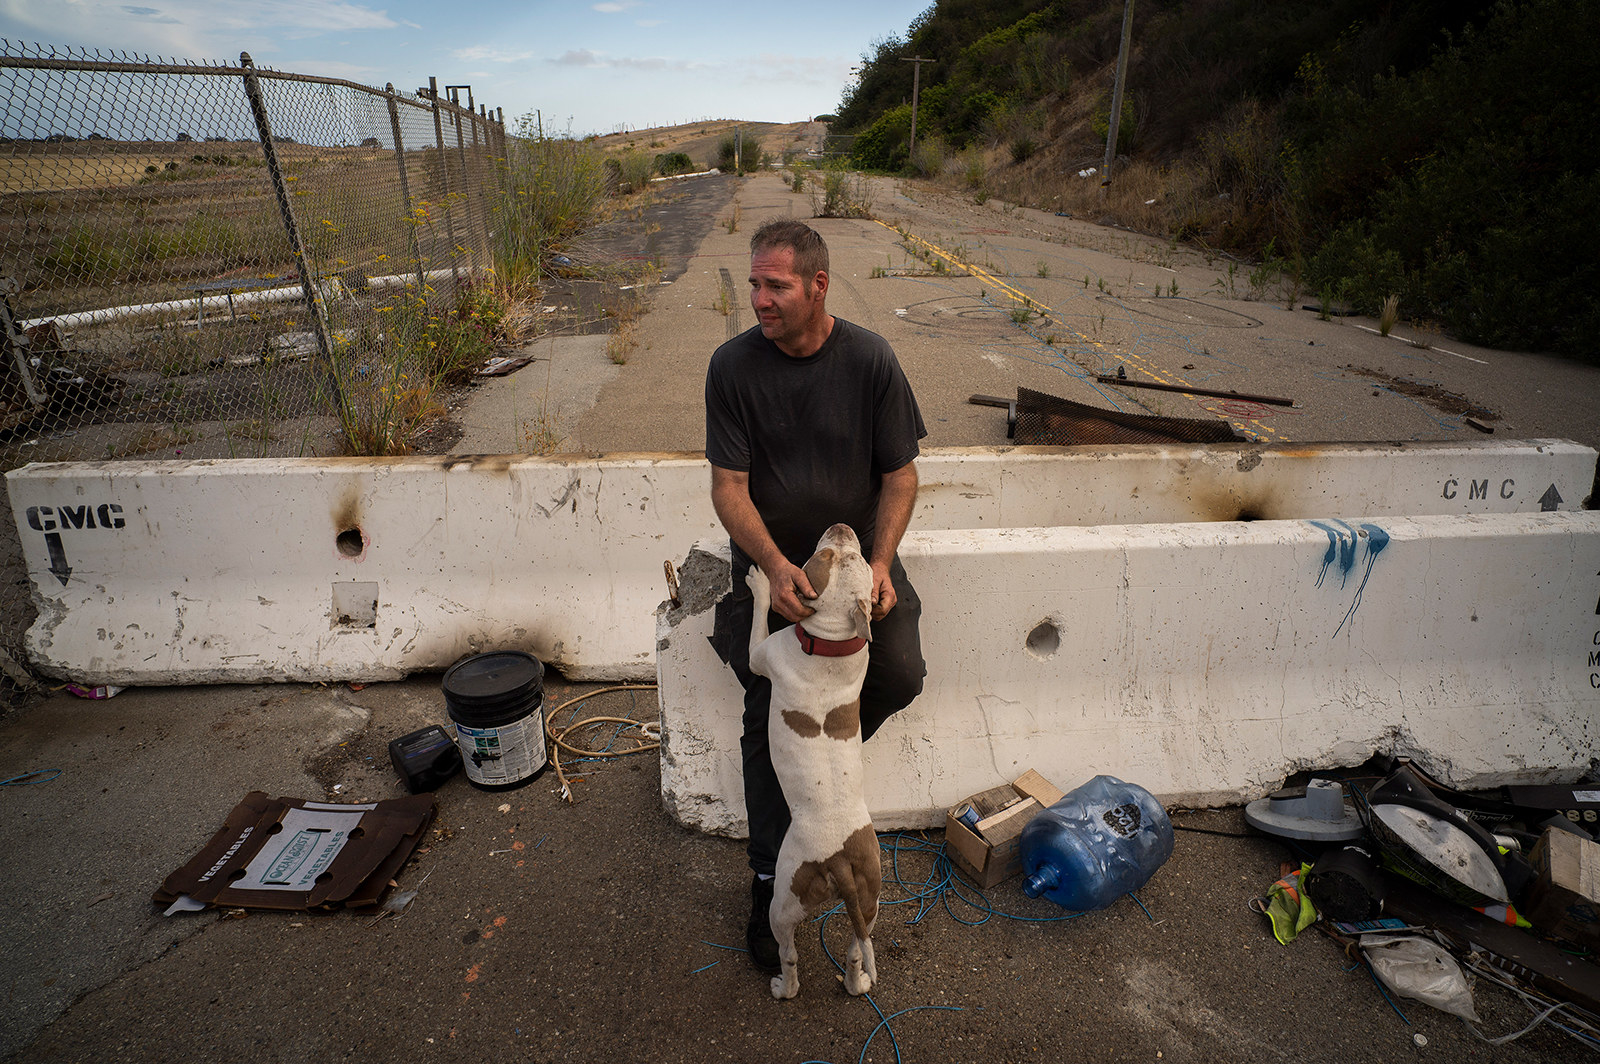 A man sits on a concrete barrier surrounded by debris, while his dog jumps up on him